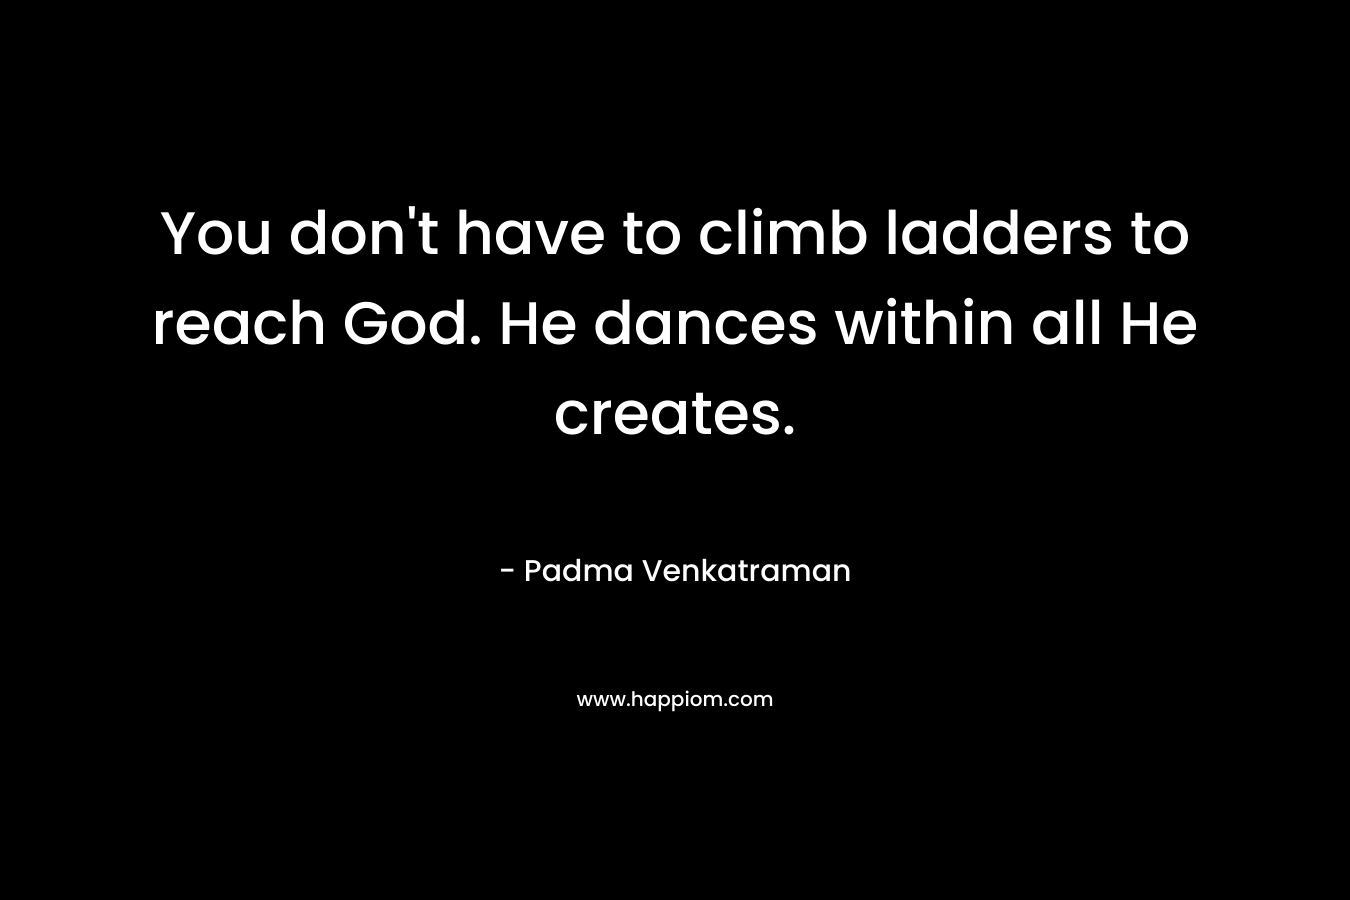 You don’t have to climb ladders to reach God. He dances within all He creates. – Padma Venkatraman